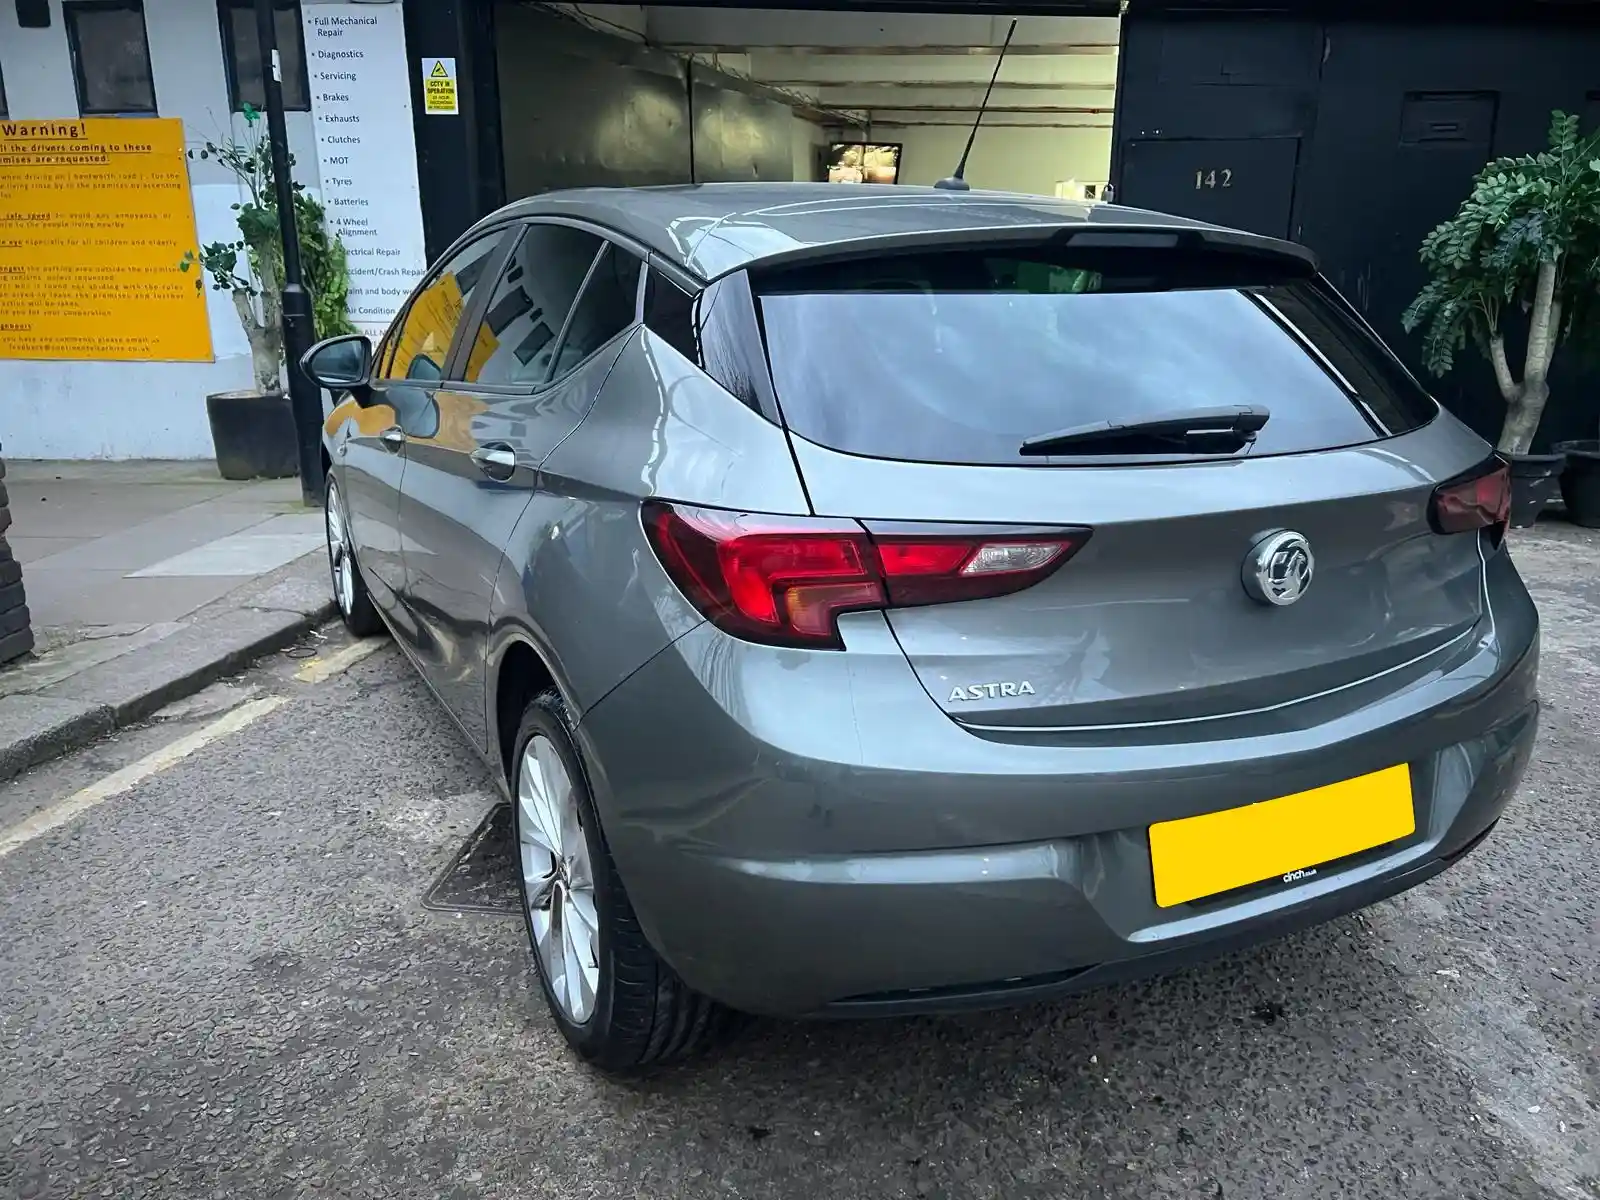 Vauxhall Astra - After Repair